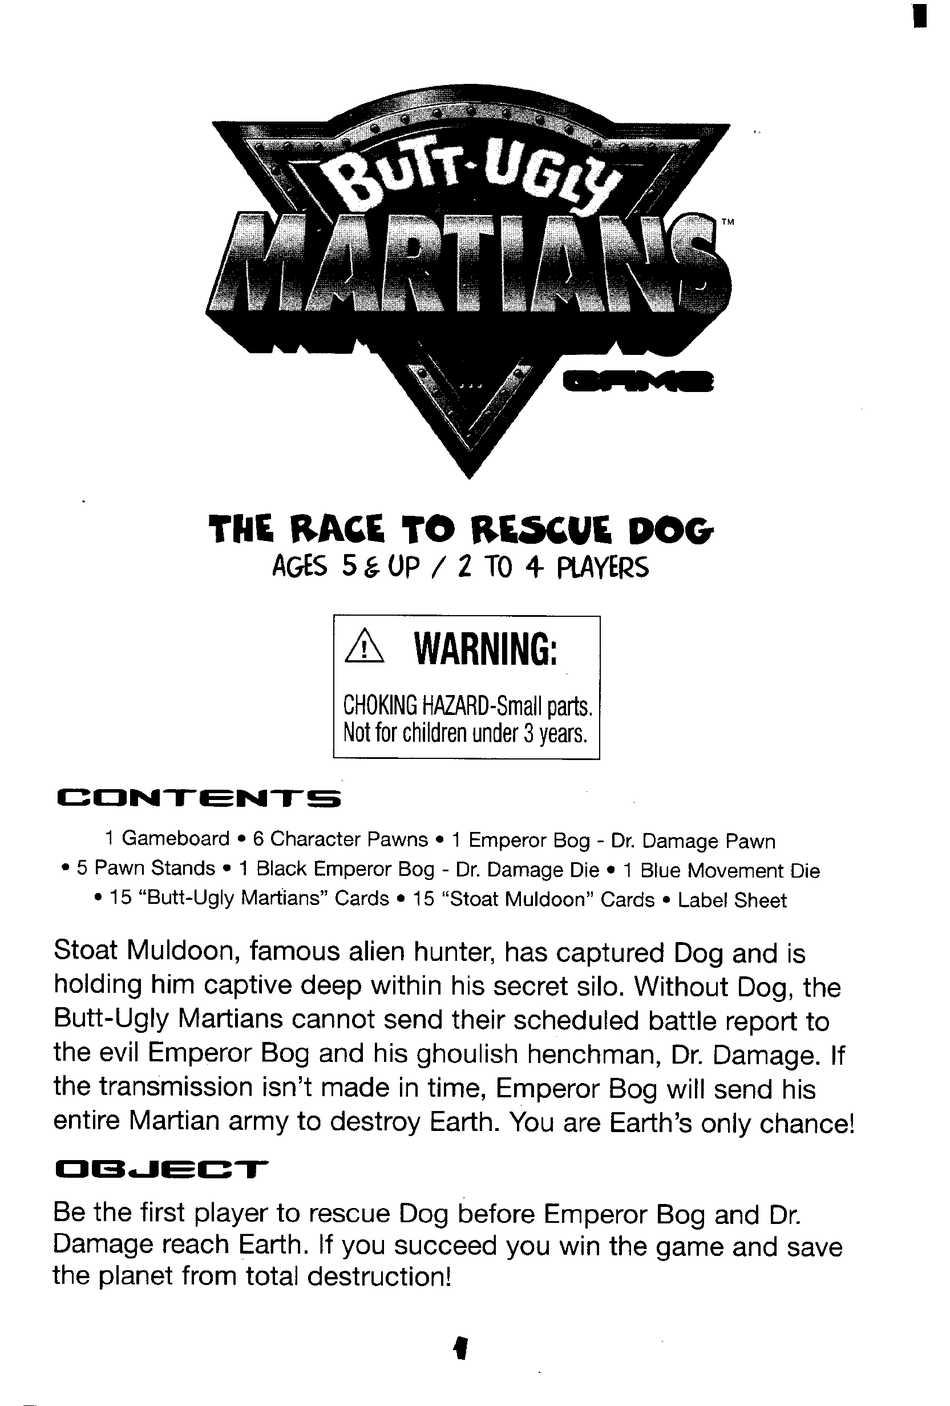 milton-bradley-butt-ugly-martians-the-race-to-rescue-dog-instructions